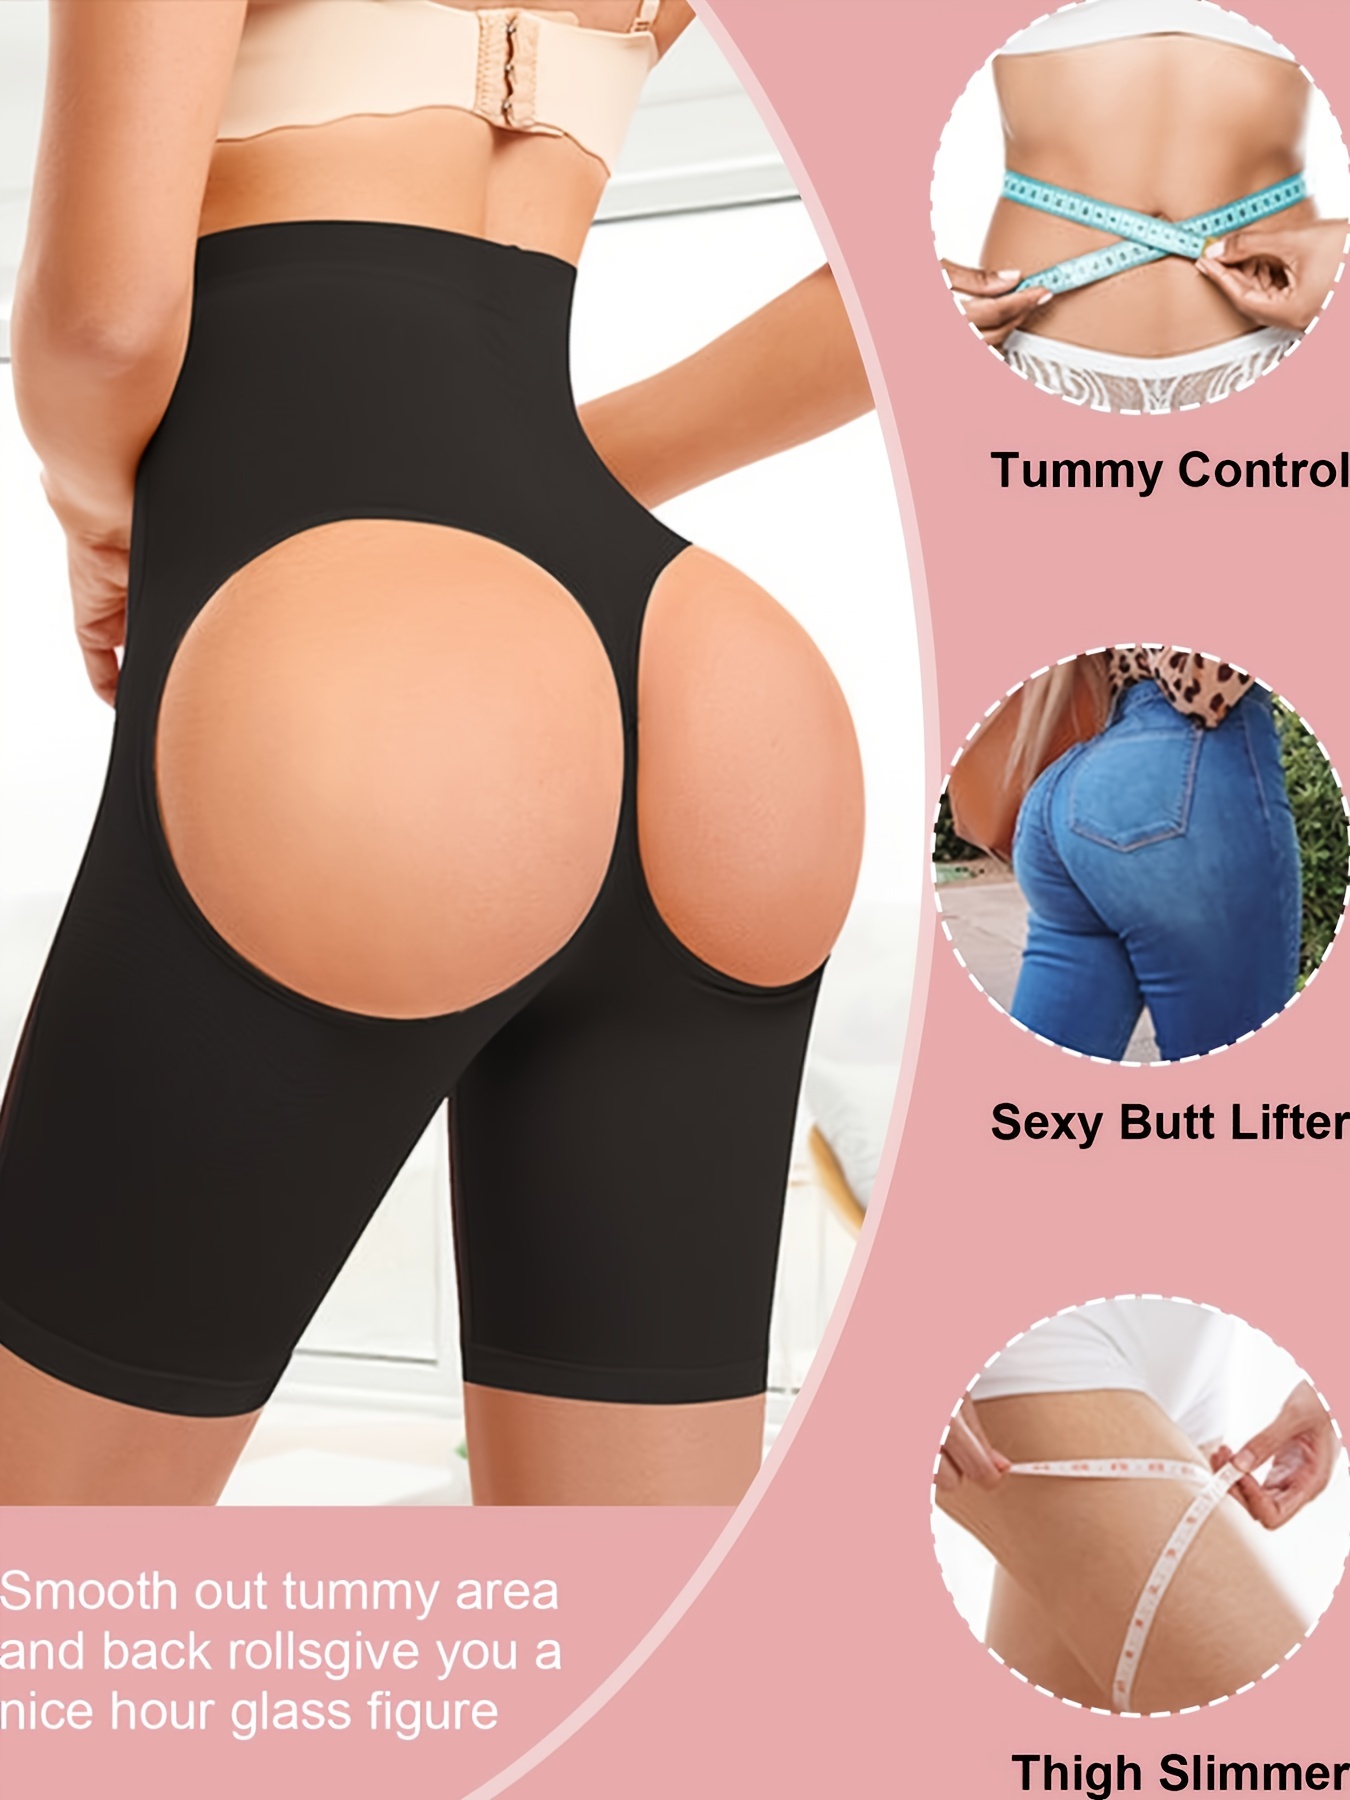 Aueoeo Waist Trainer for Women Lower Belly and Butt Lift, Waist Trainer  Shorts Ladies Seamless One-Piece Open Crotch Body Shaper Abdominal Lifter  Hip